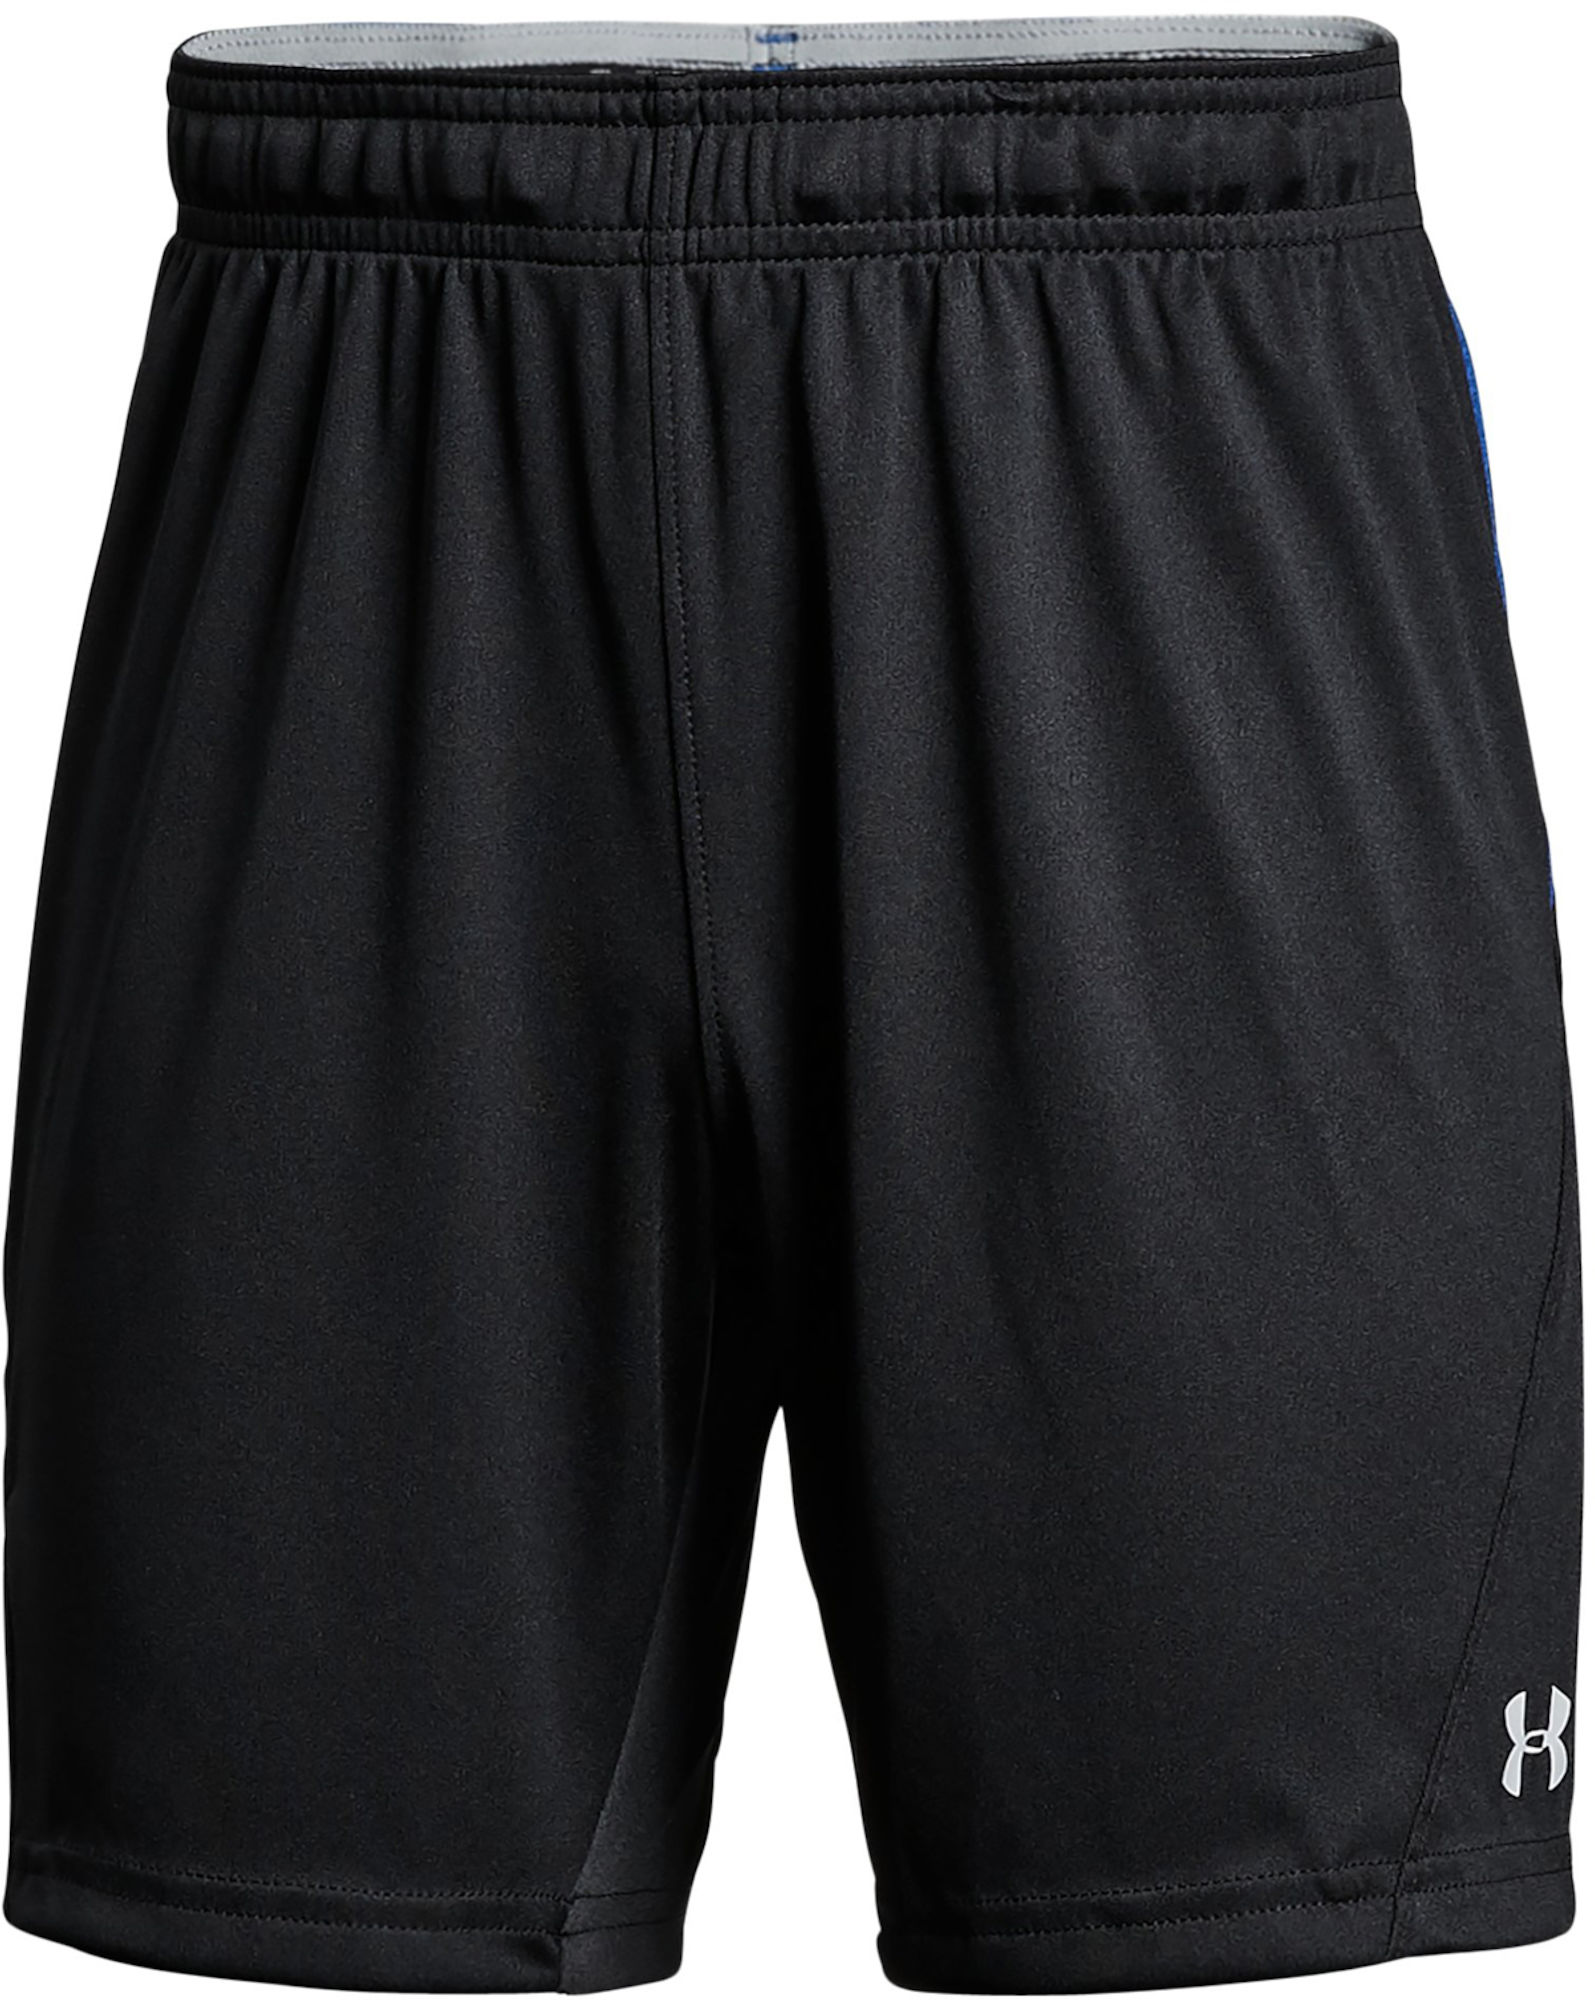 Under Armour Y Challenger II Knit Shorts Black XS